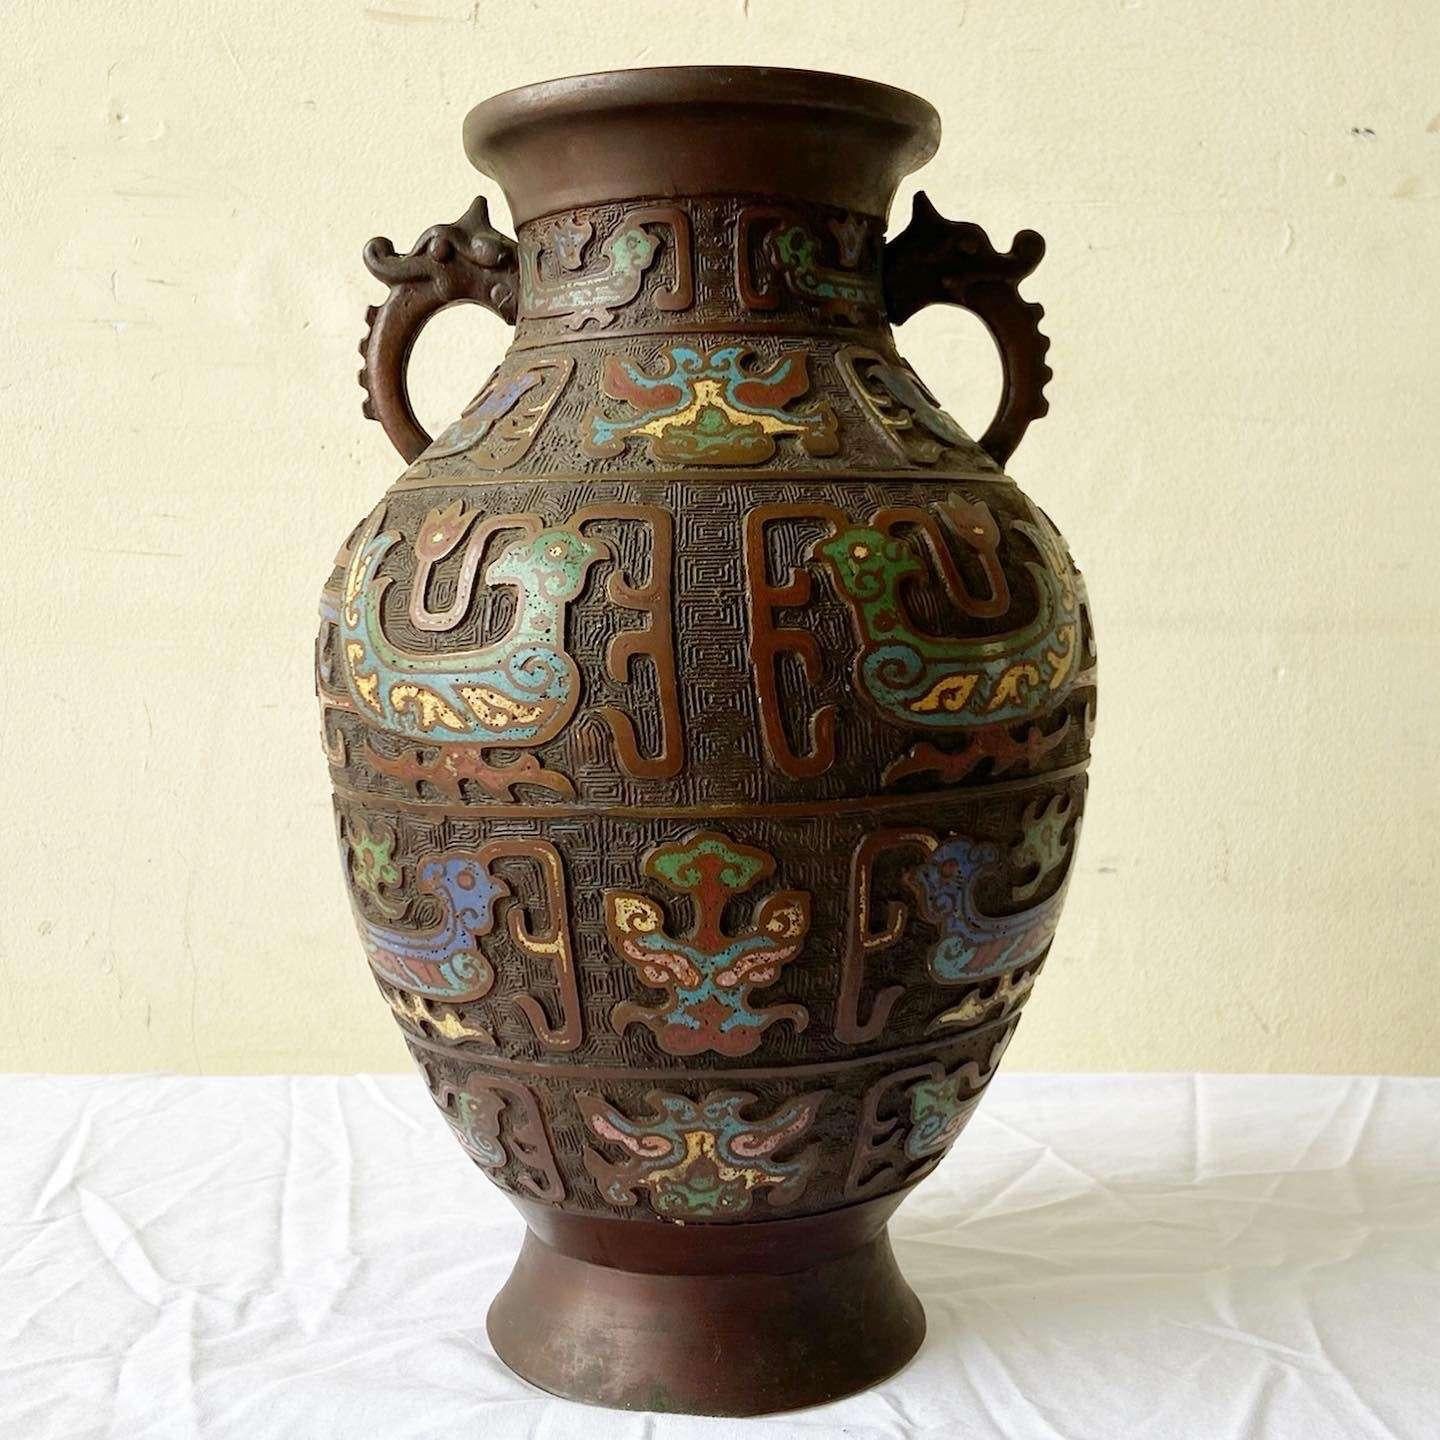 Exceptional vintage early 20th century champleve brass vase. Features a vibrant enamel design throughout the vase.
